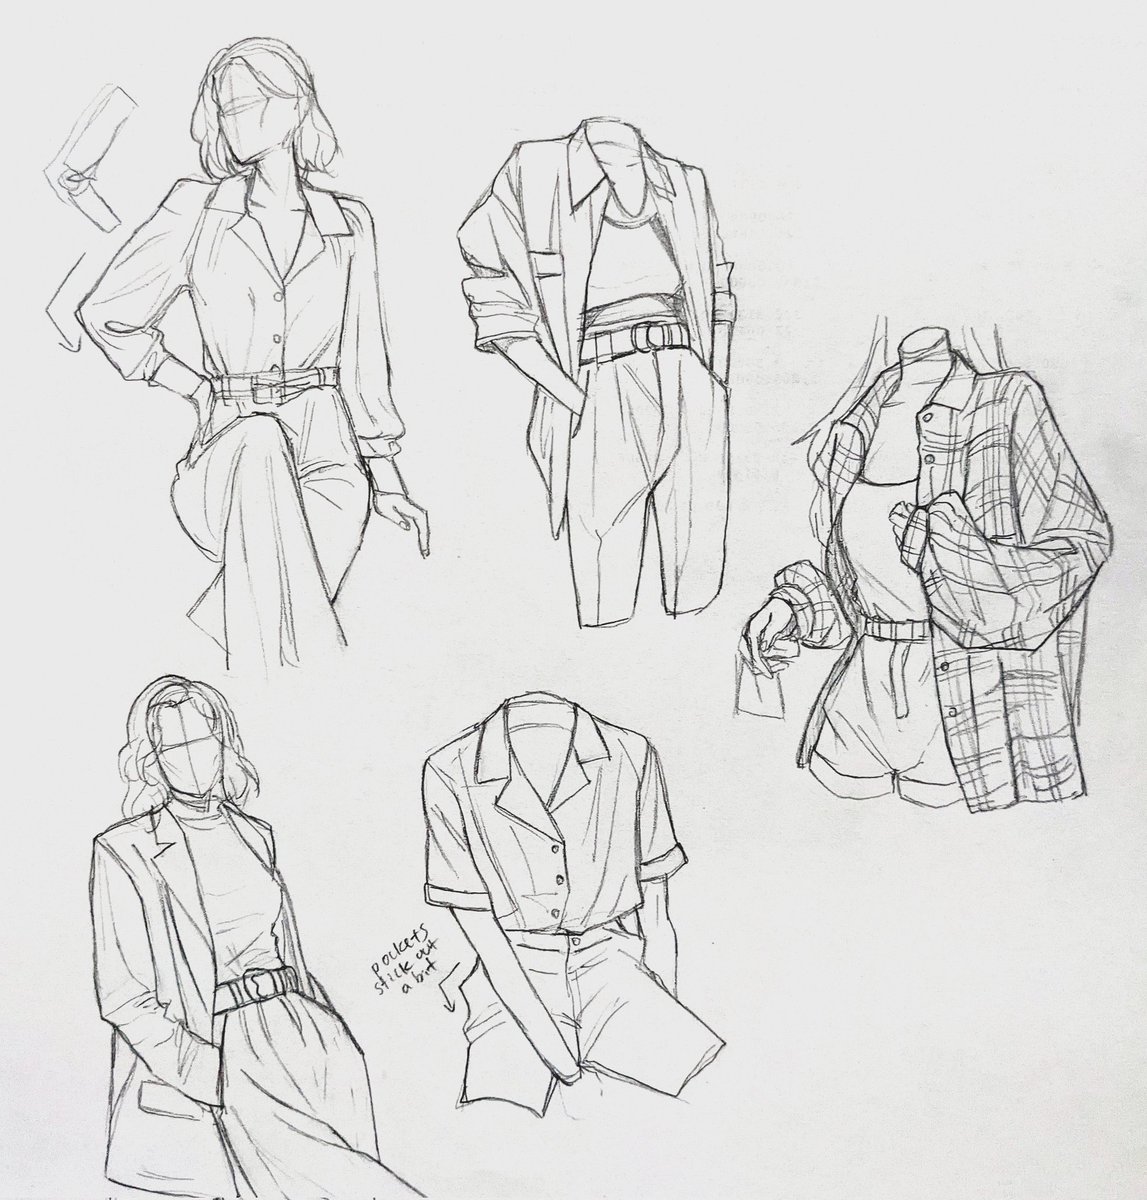 My favorite studies from this week! ☺️ Trying to get better at understanding the shapes and folds in clothes. 